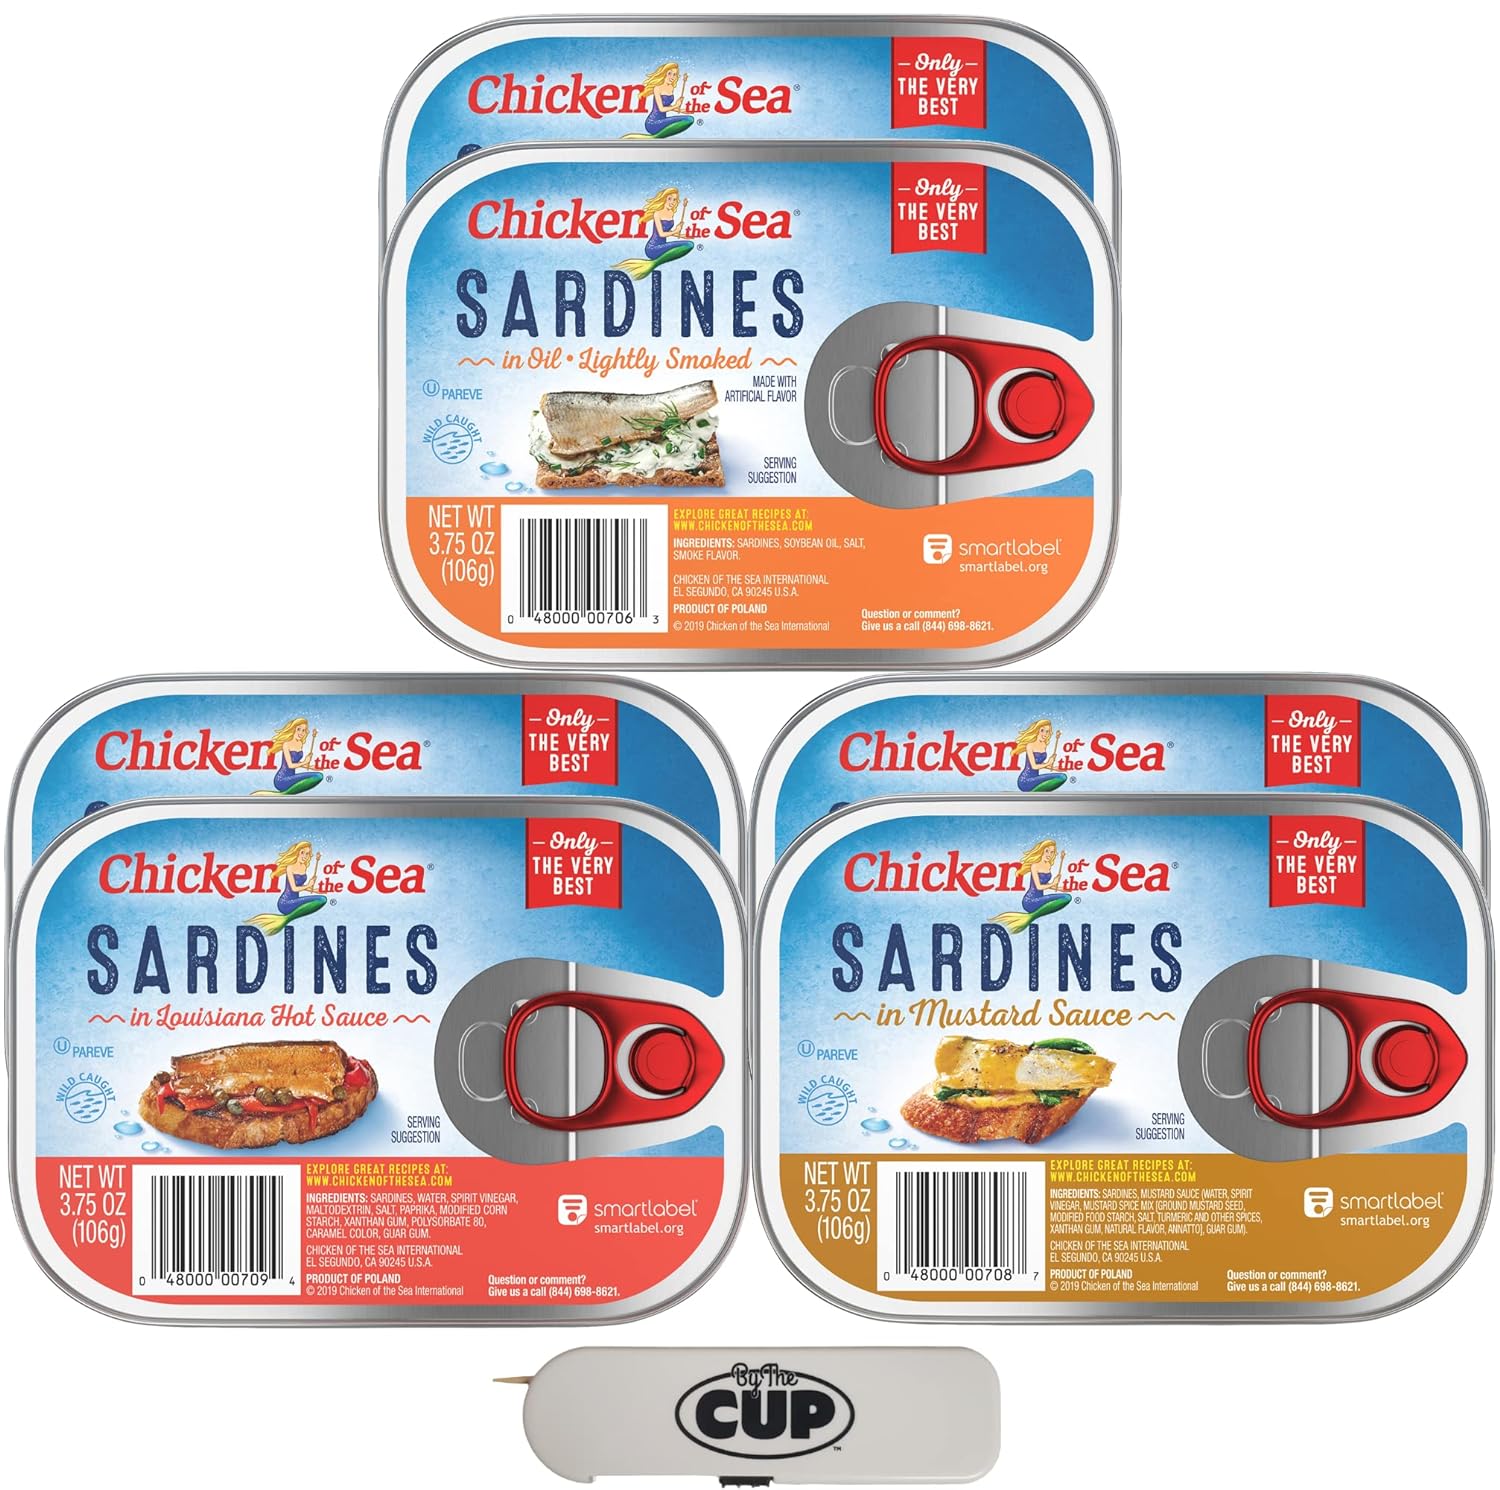 Chicken of the Sea Sardine Variety Pack, Louisiana Hot Sauce, Mustard Sauce, Lightly Smoked, 2 of each with 1 - By The Cup Travel Toothpick Dispenser